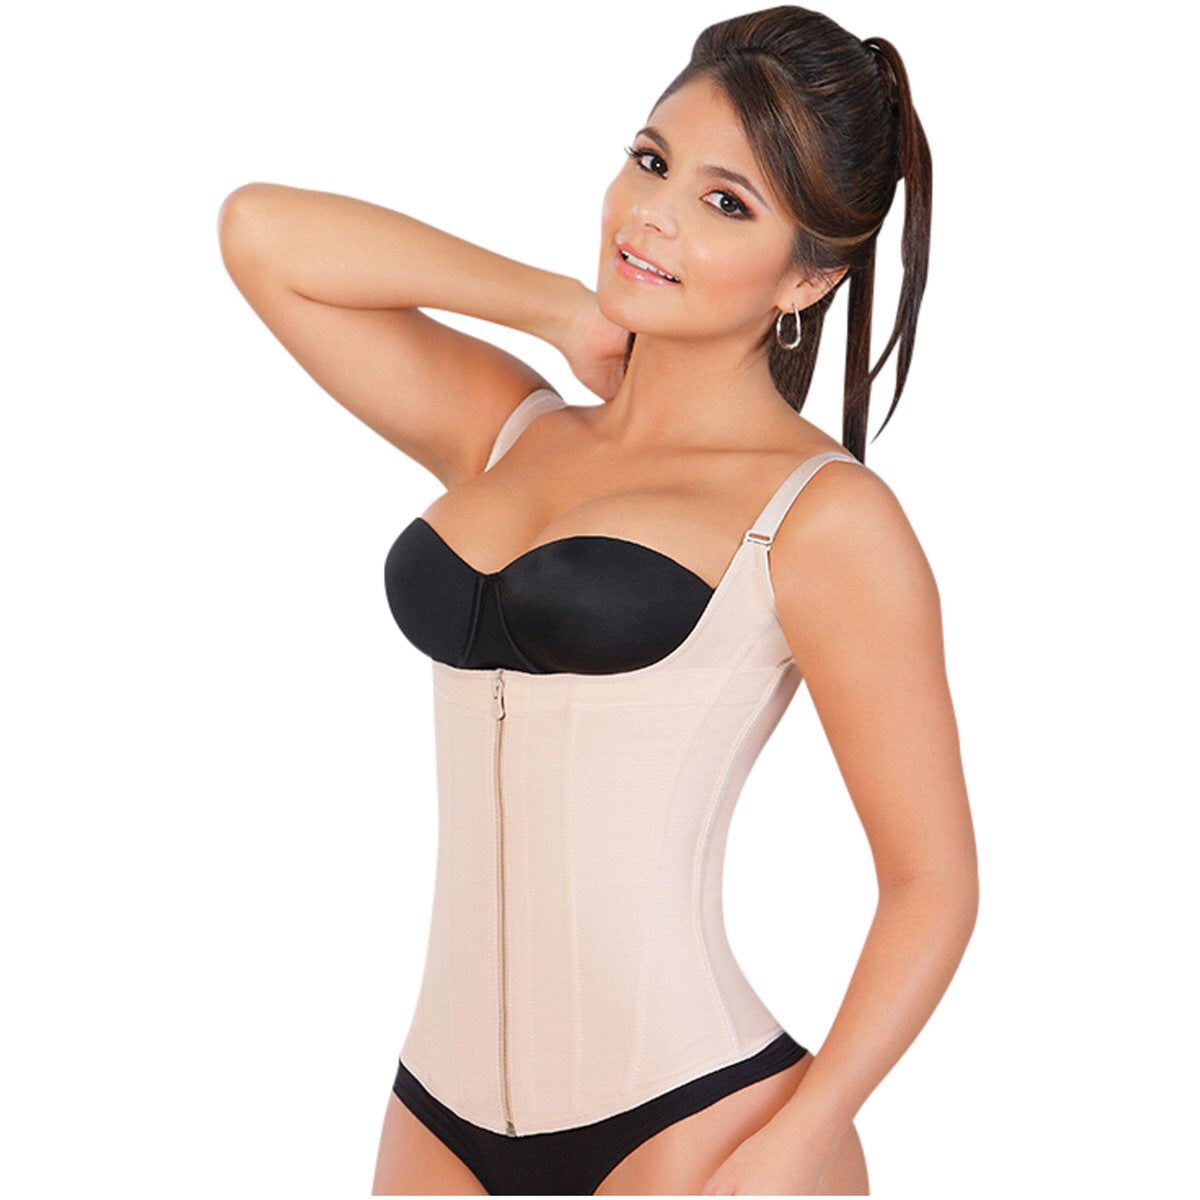 Find Cheap, Fashionable and Slimming colombian fajas wholesale